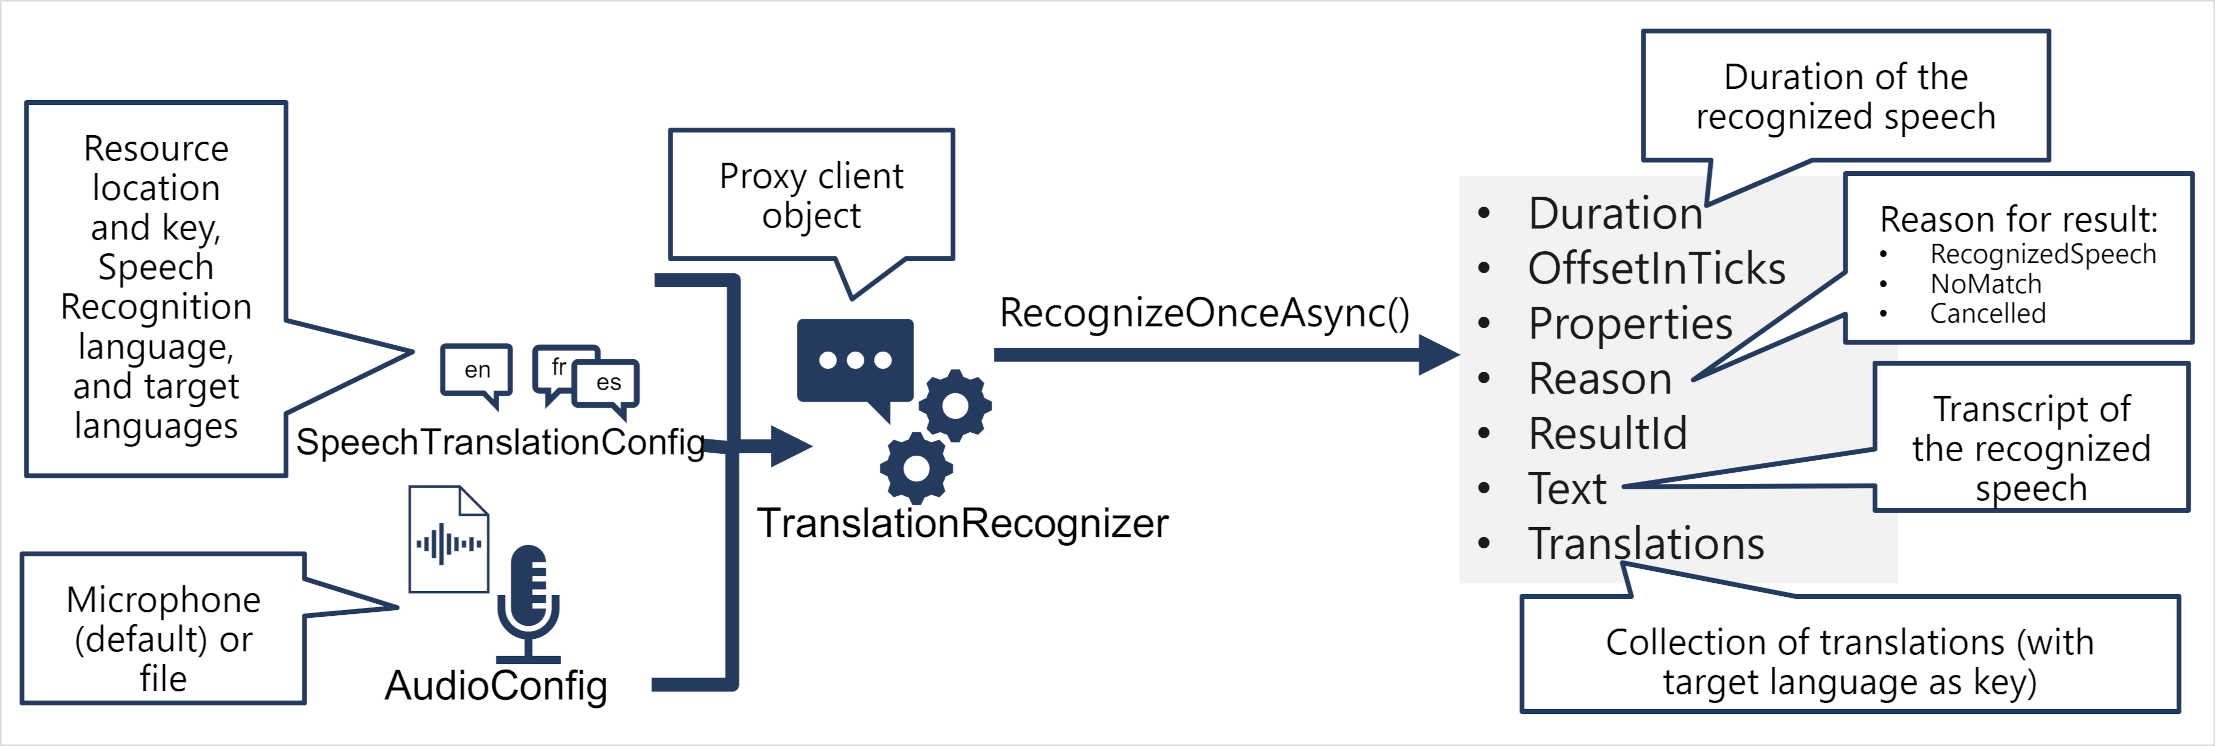 A TranslationRecognizer object is created from a SpeechConfig, TranslationConfig, and AudioConfig; and its RecognizeOnceAsync method is used to call the Speech API.